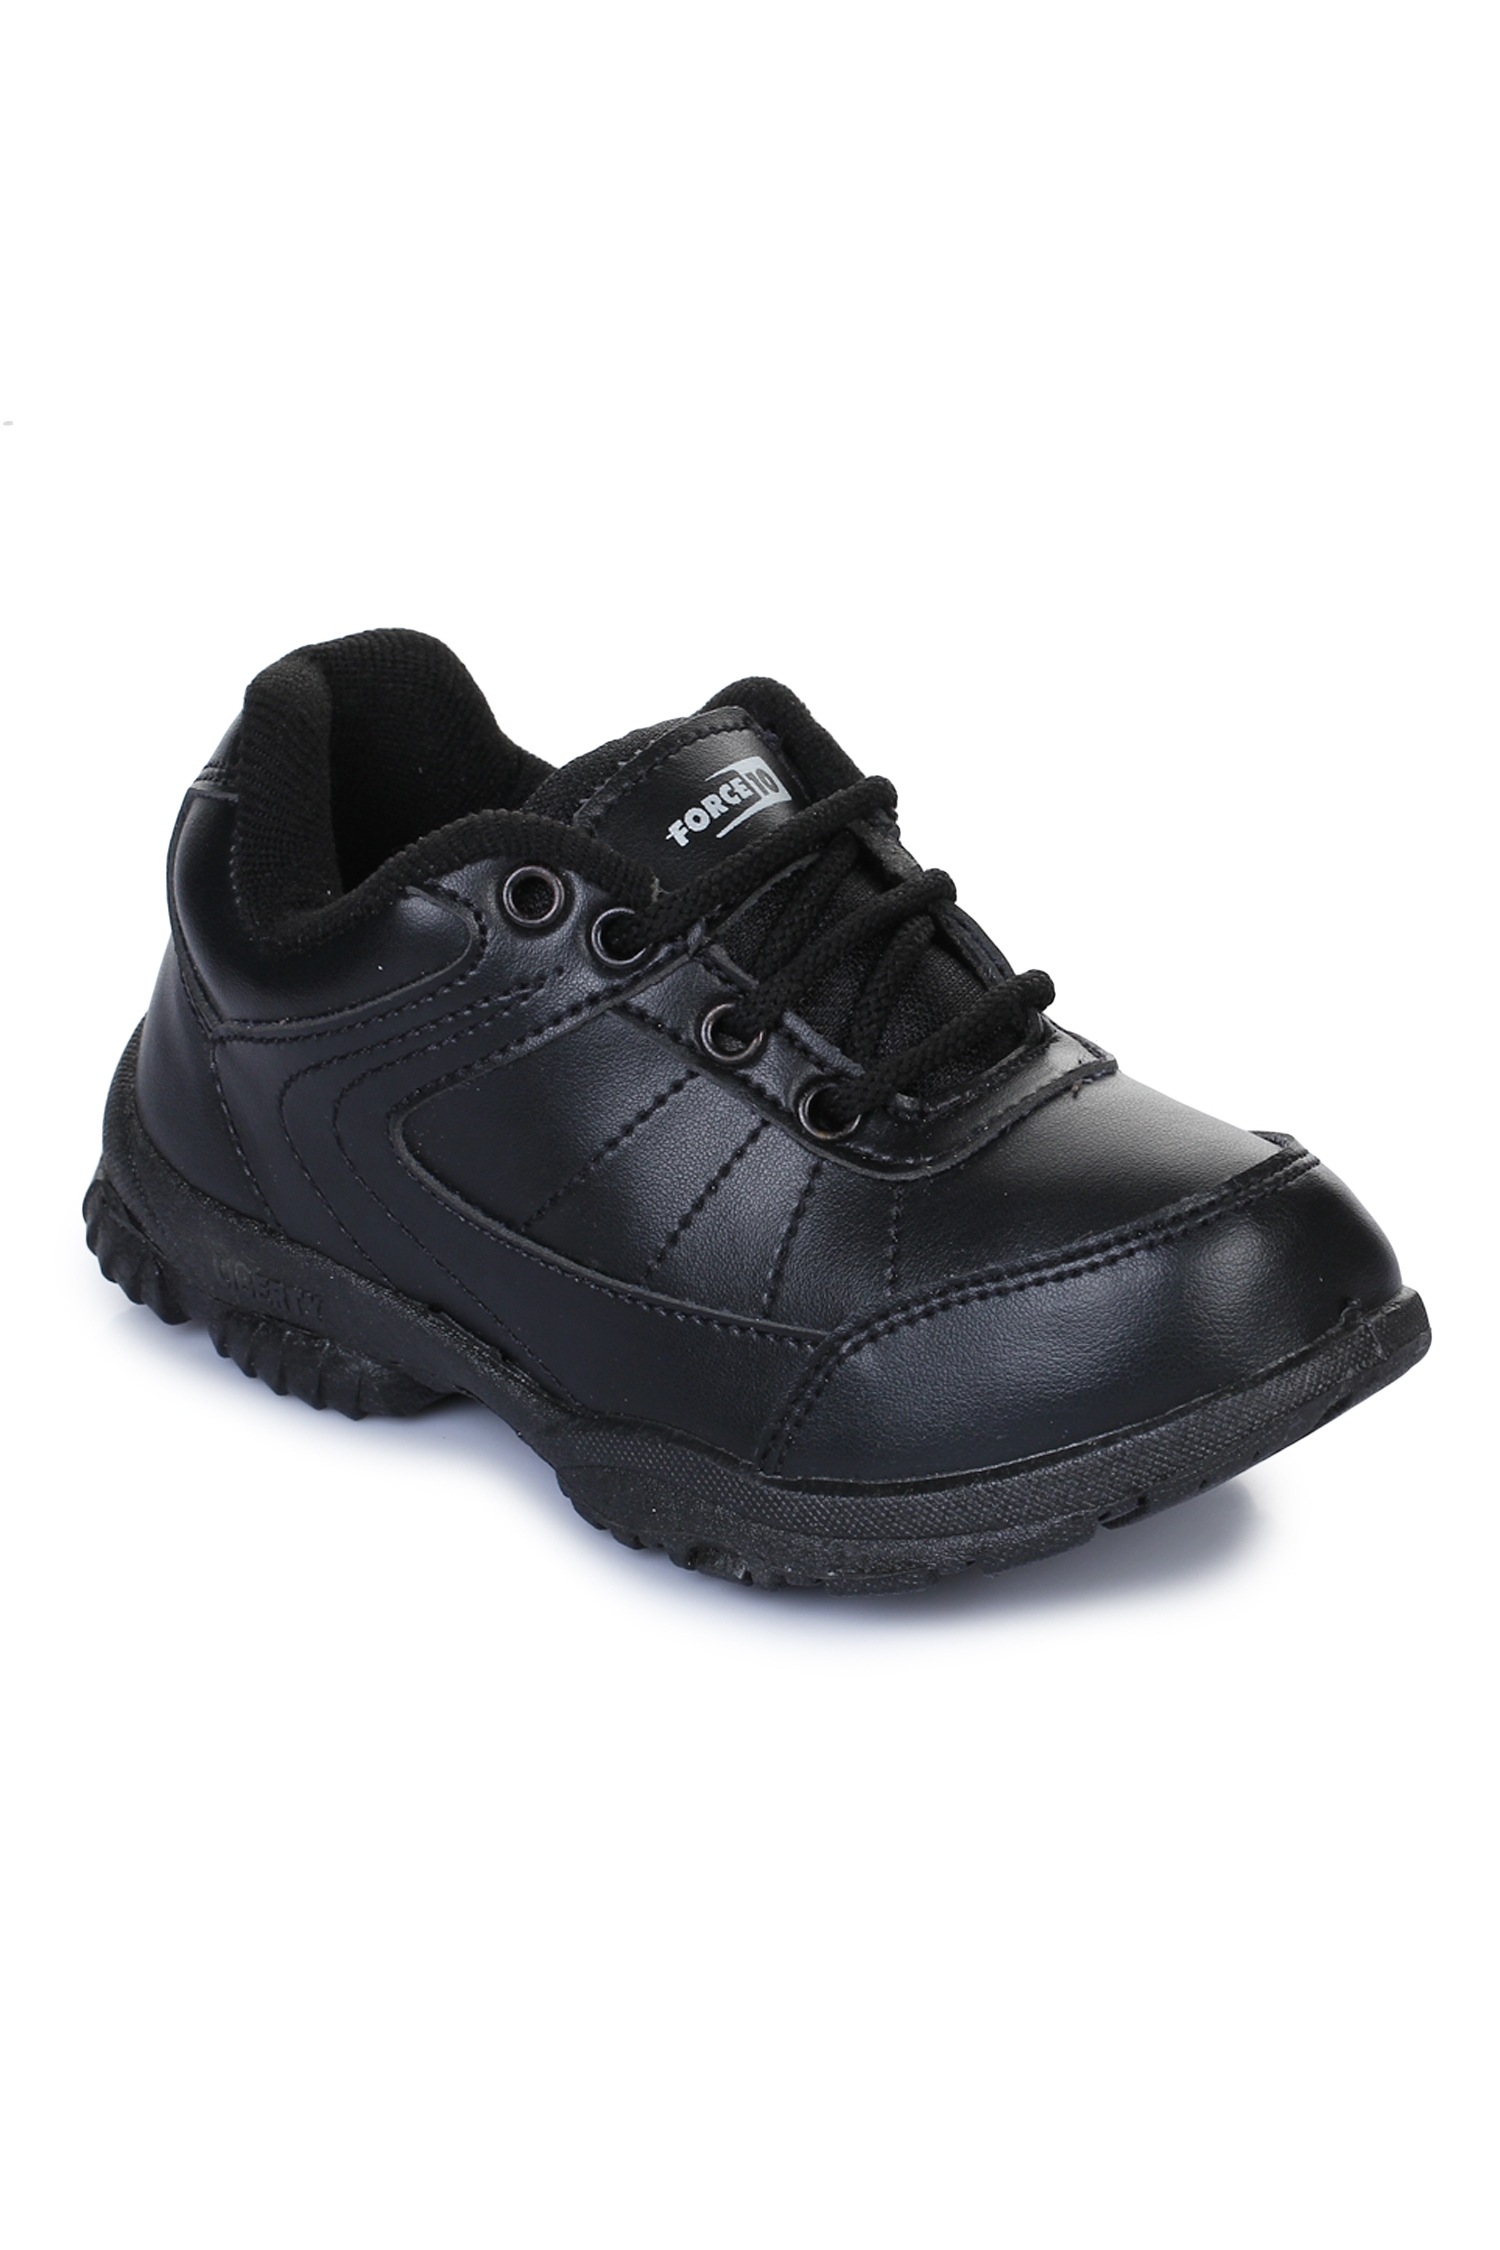 Liberty | Force 10 by Liberty Black School Shoes